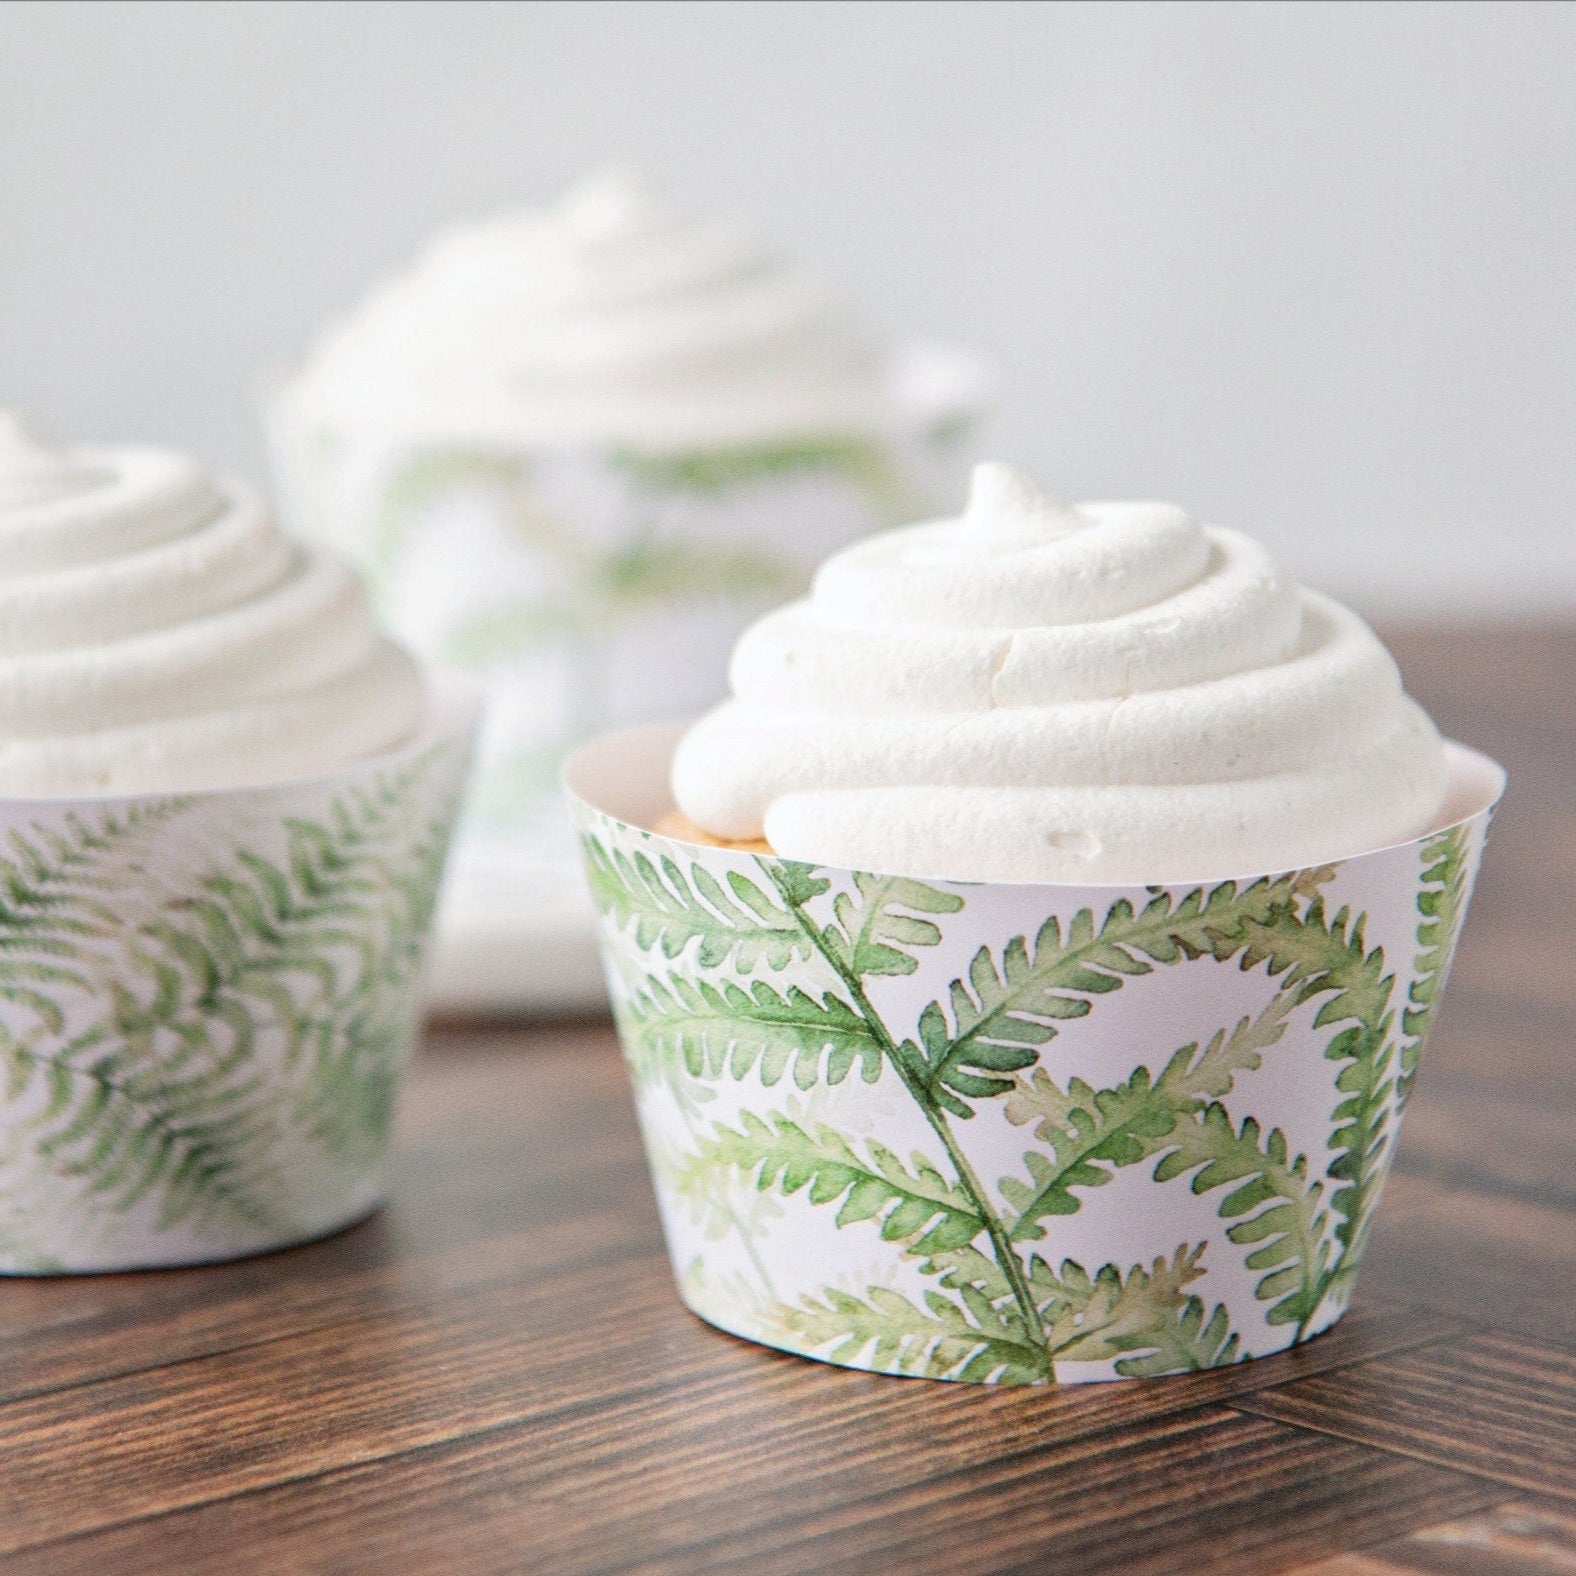 Fern Frond Cupcake Wrapper Duo - PRINTABLE cupcake sleeve, instant digital download PDF, pretty wedding greenery tropical watercolor design.